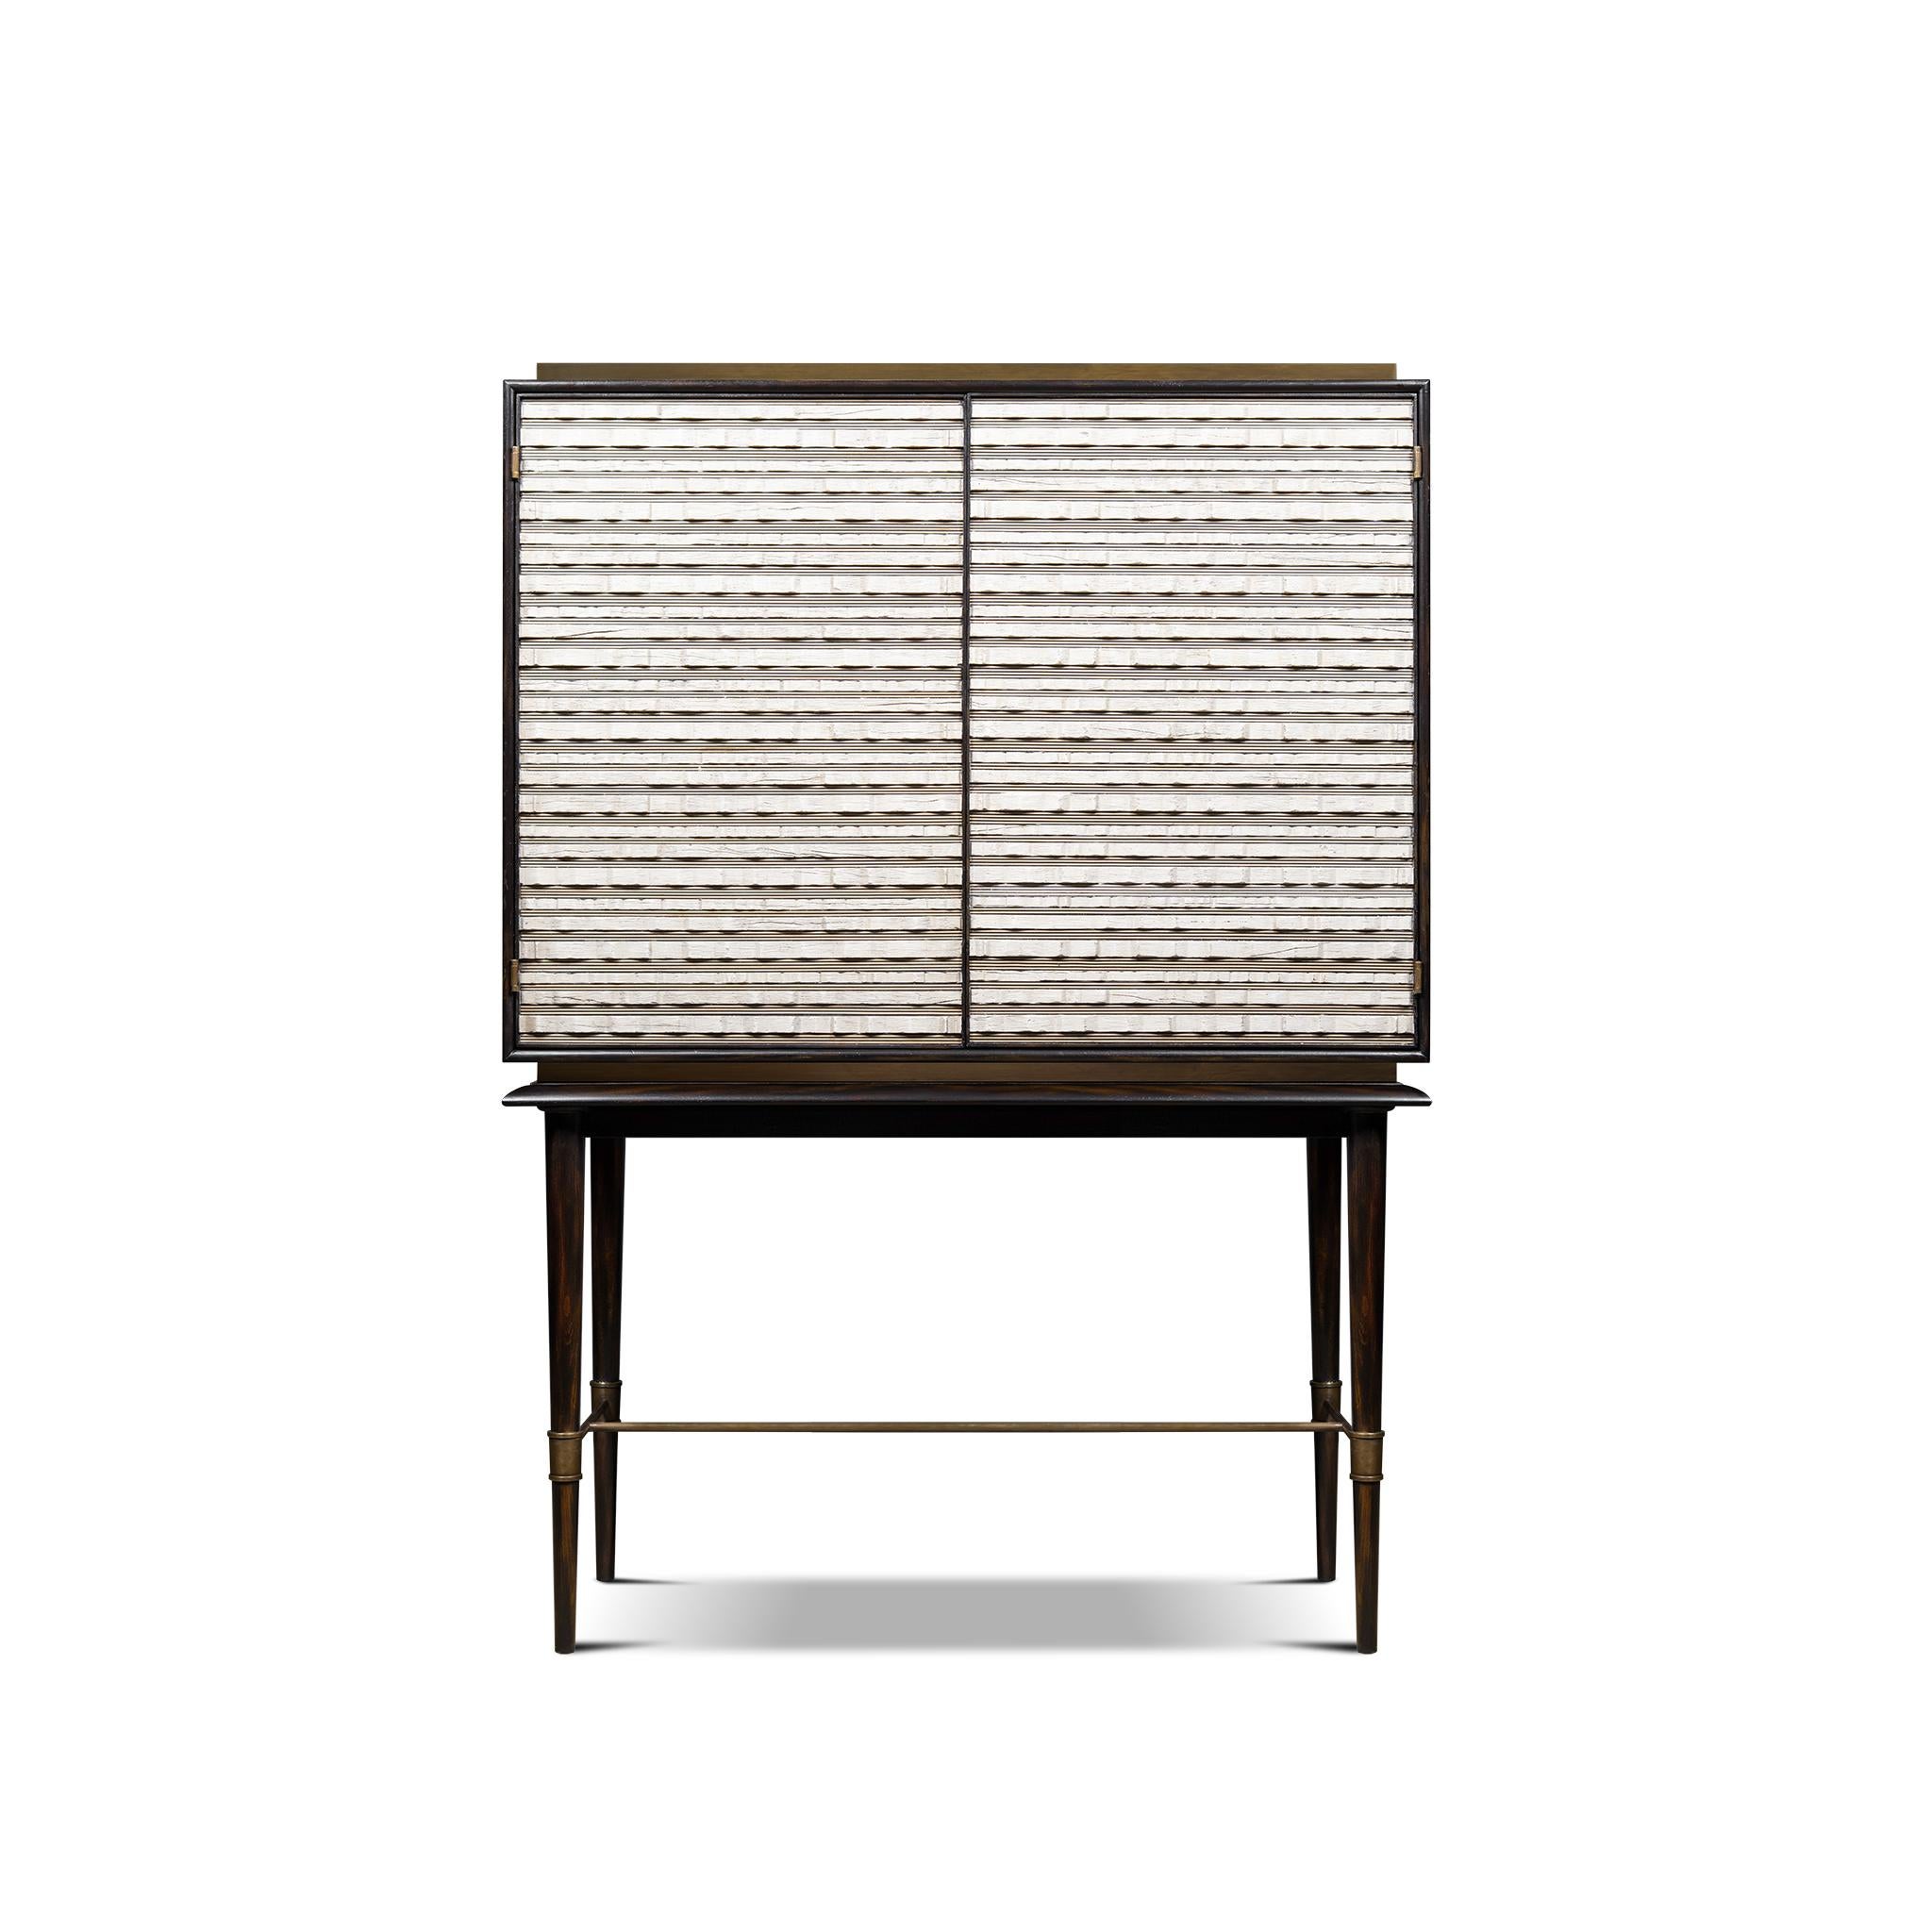 The Tourmont cabinet on stand was inspired by natural and irregular patterns found in mountainous rocks highlighted by a dark frame. The cabinet has a brass base and top which lies on an elegant stand that has delicate pointed legs with a brass